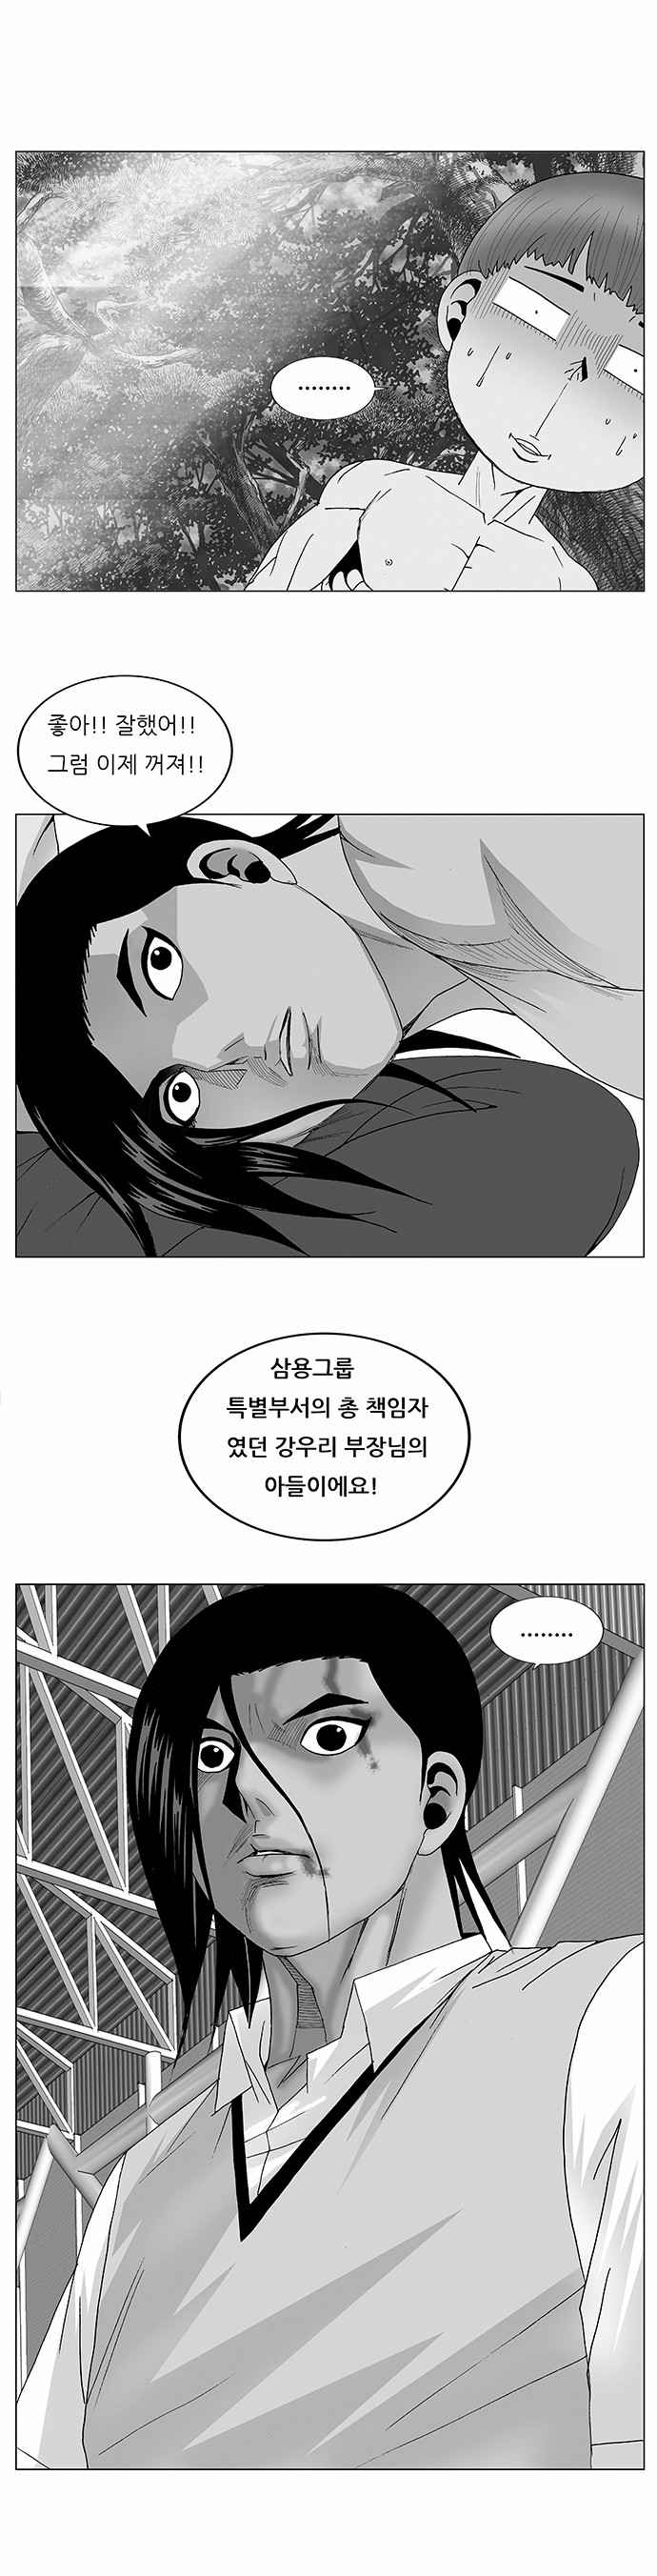 Ultimate Legend - Kang Hae Hyo - Chapter 90 - Page 1